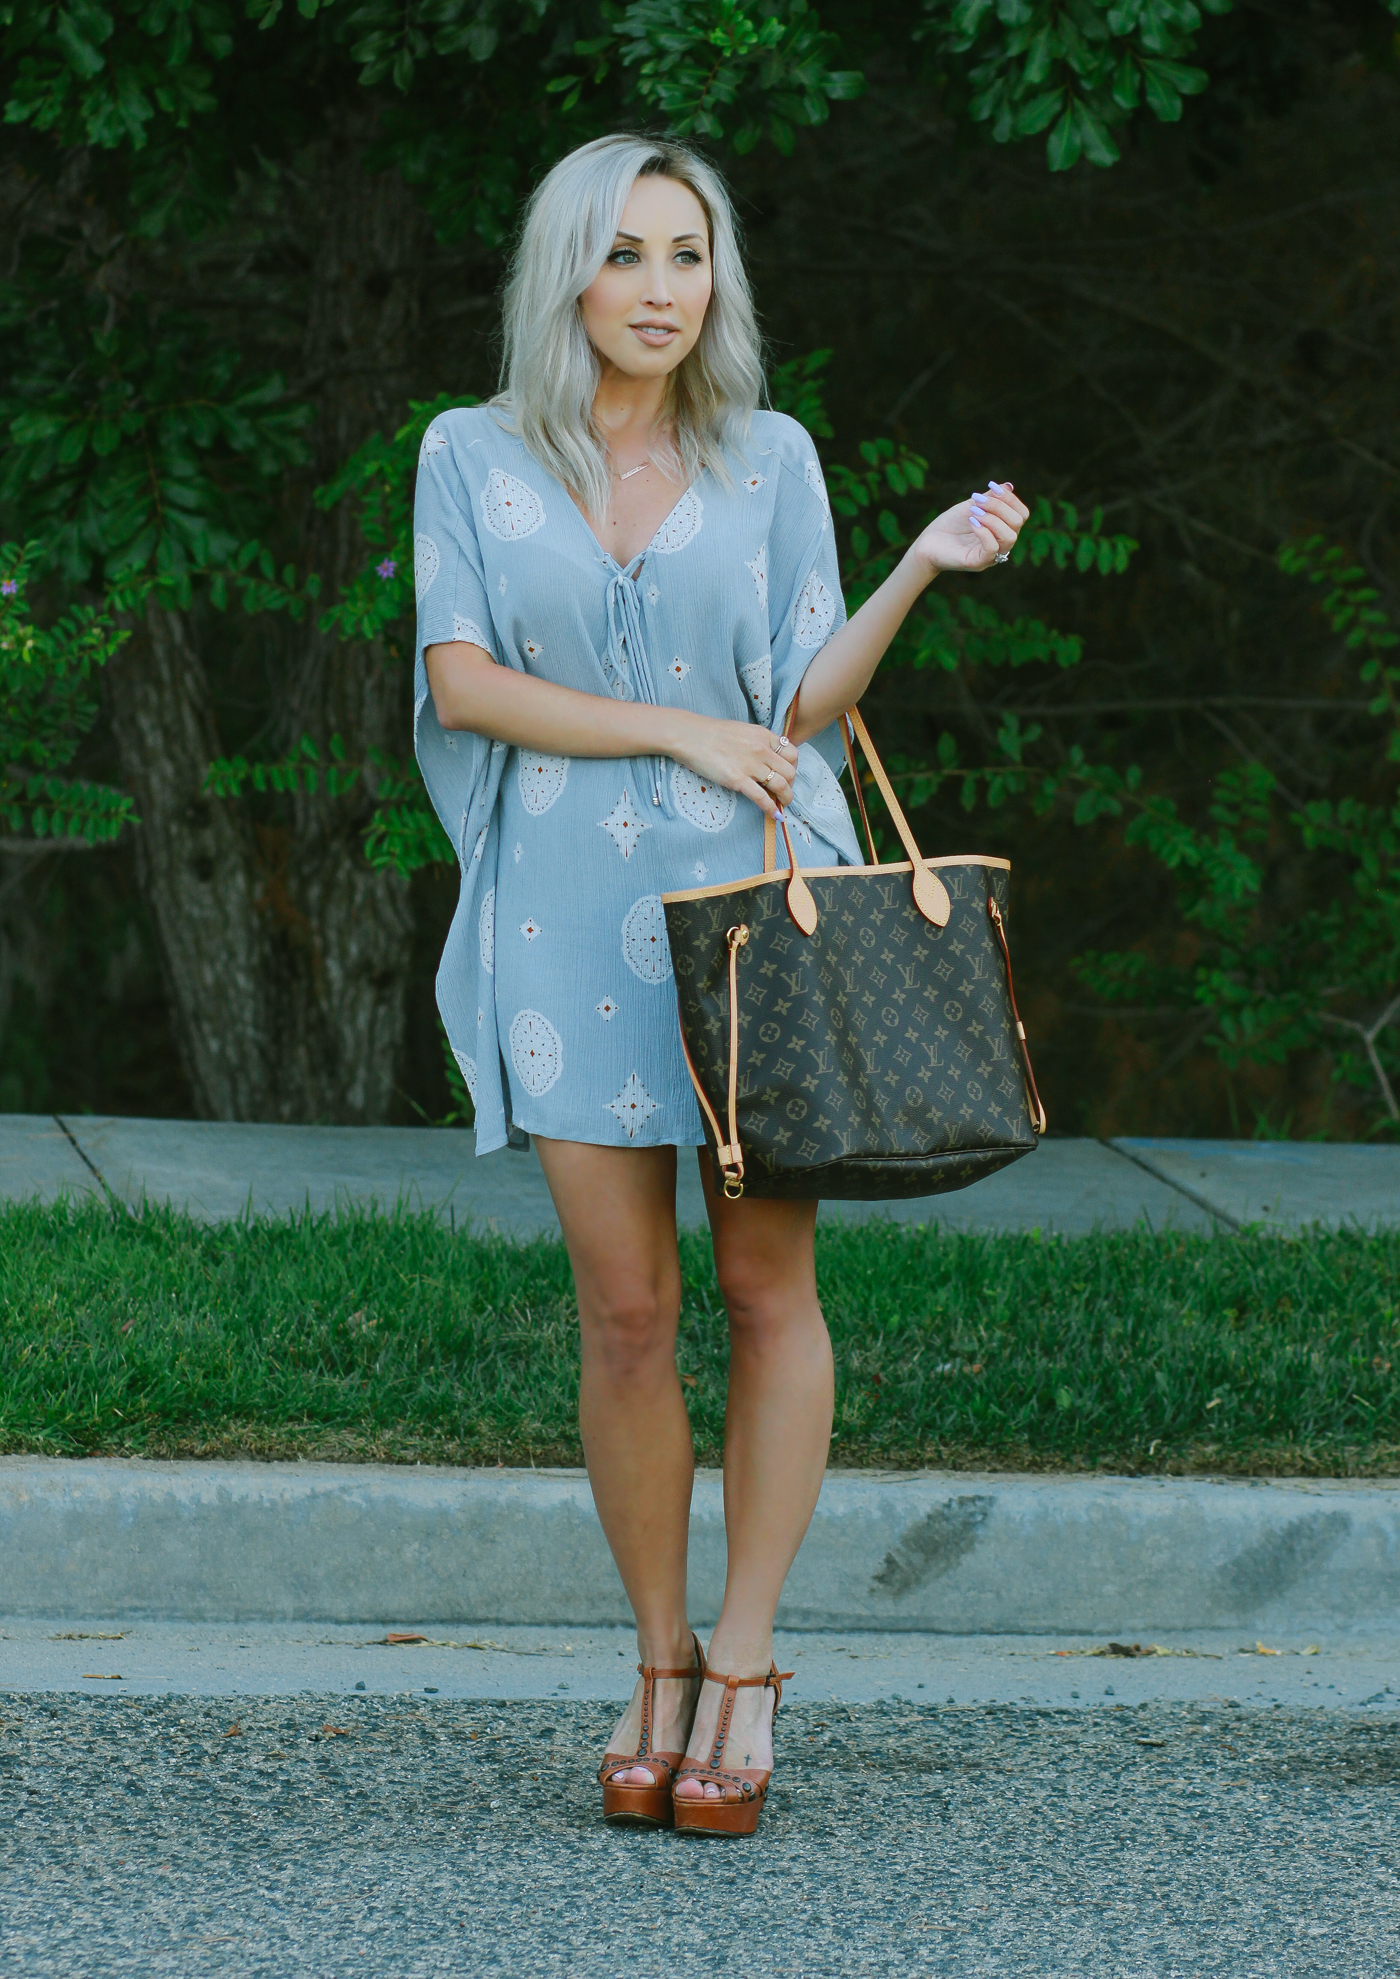 Blondie in the City | Pastel Blue Tunic | Vince Camuto Wedges | Louis Vuitton Neverfull Bag